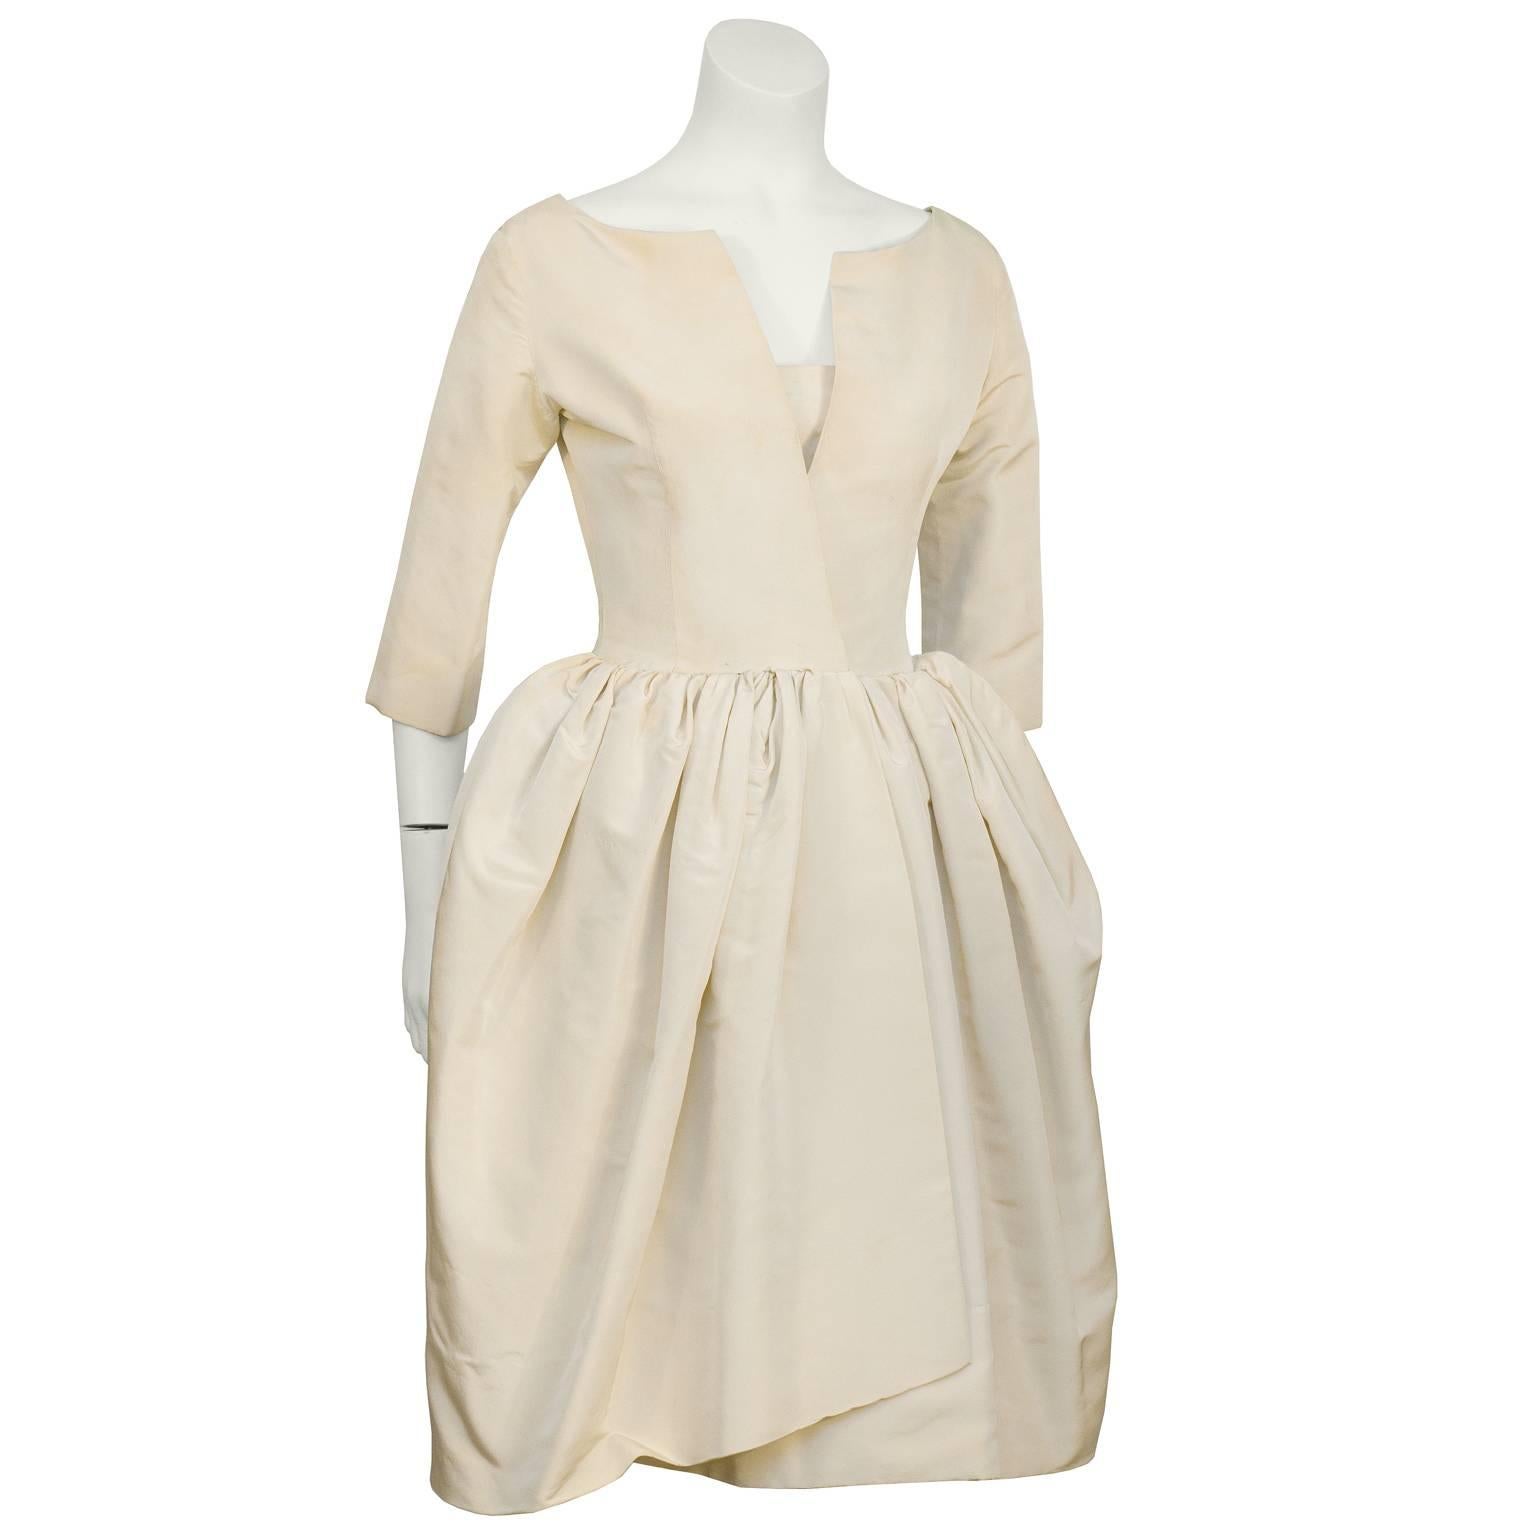 Pre 1957 Christian Dior beige silk robe de soir cocktail dress.  Unique example of one of the first French couture partnerships with a North American luxury department store. All hand stitched. Fitted waist with a slit overlay neckline with half